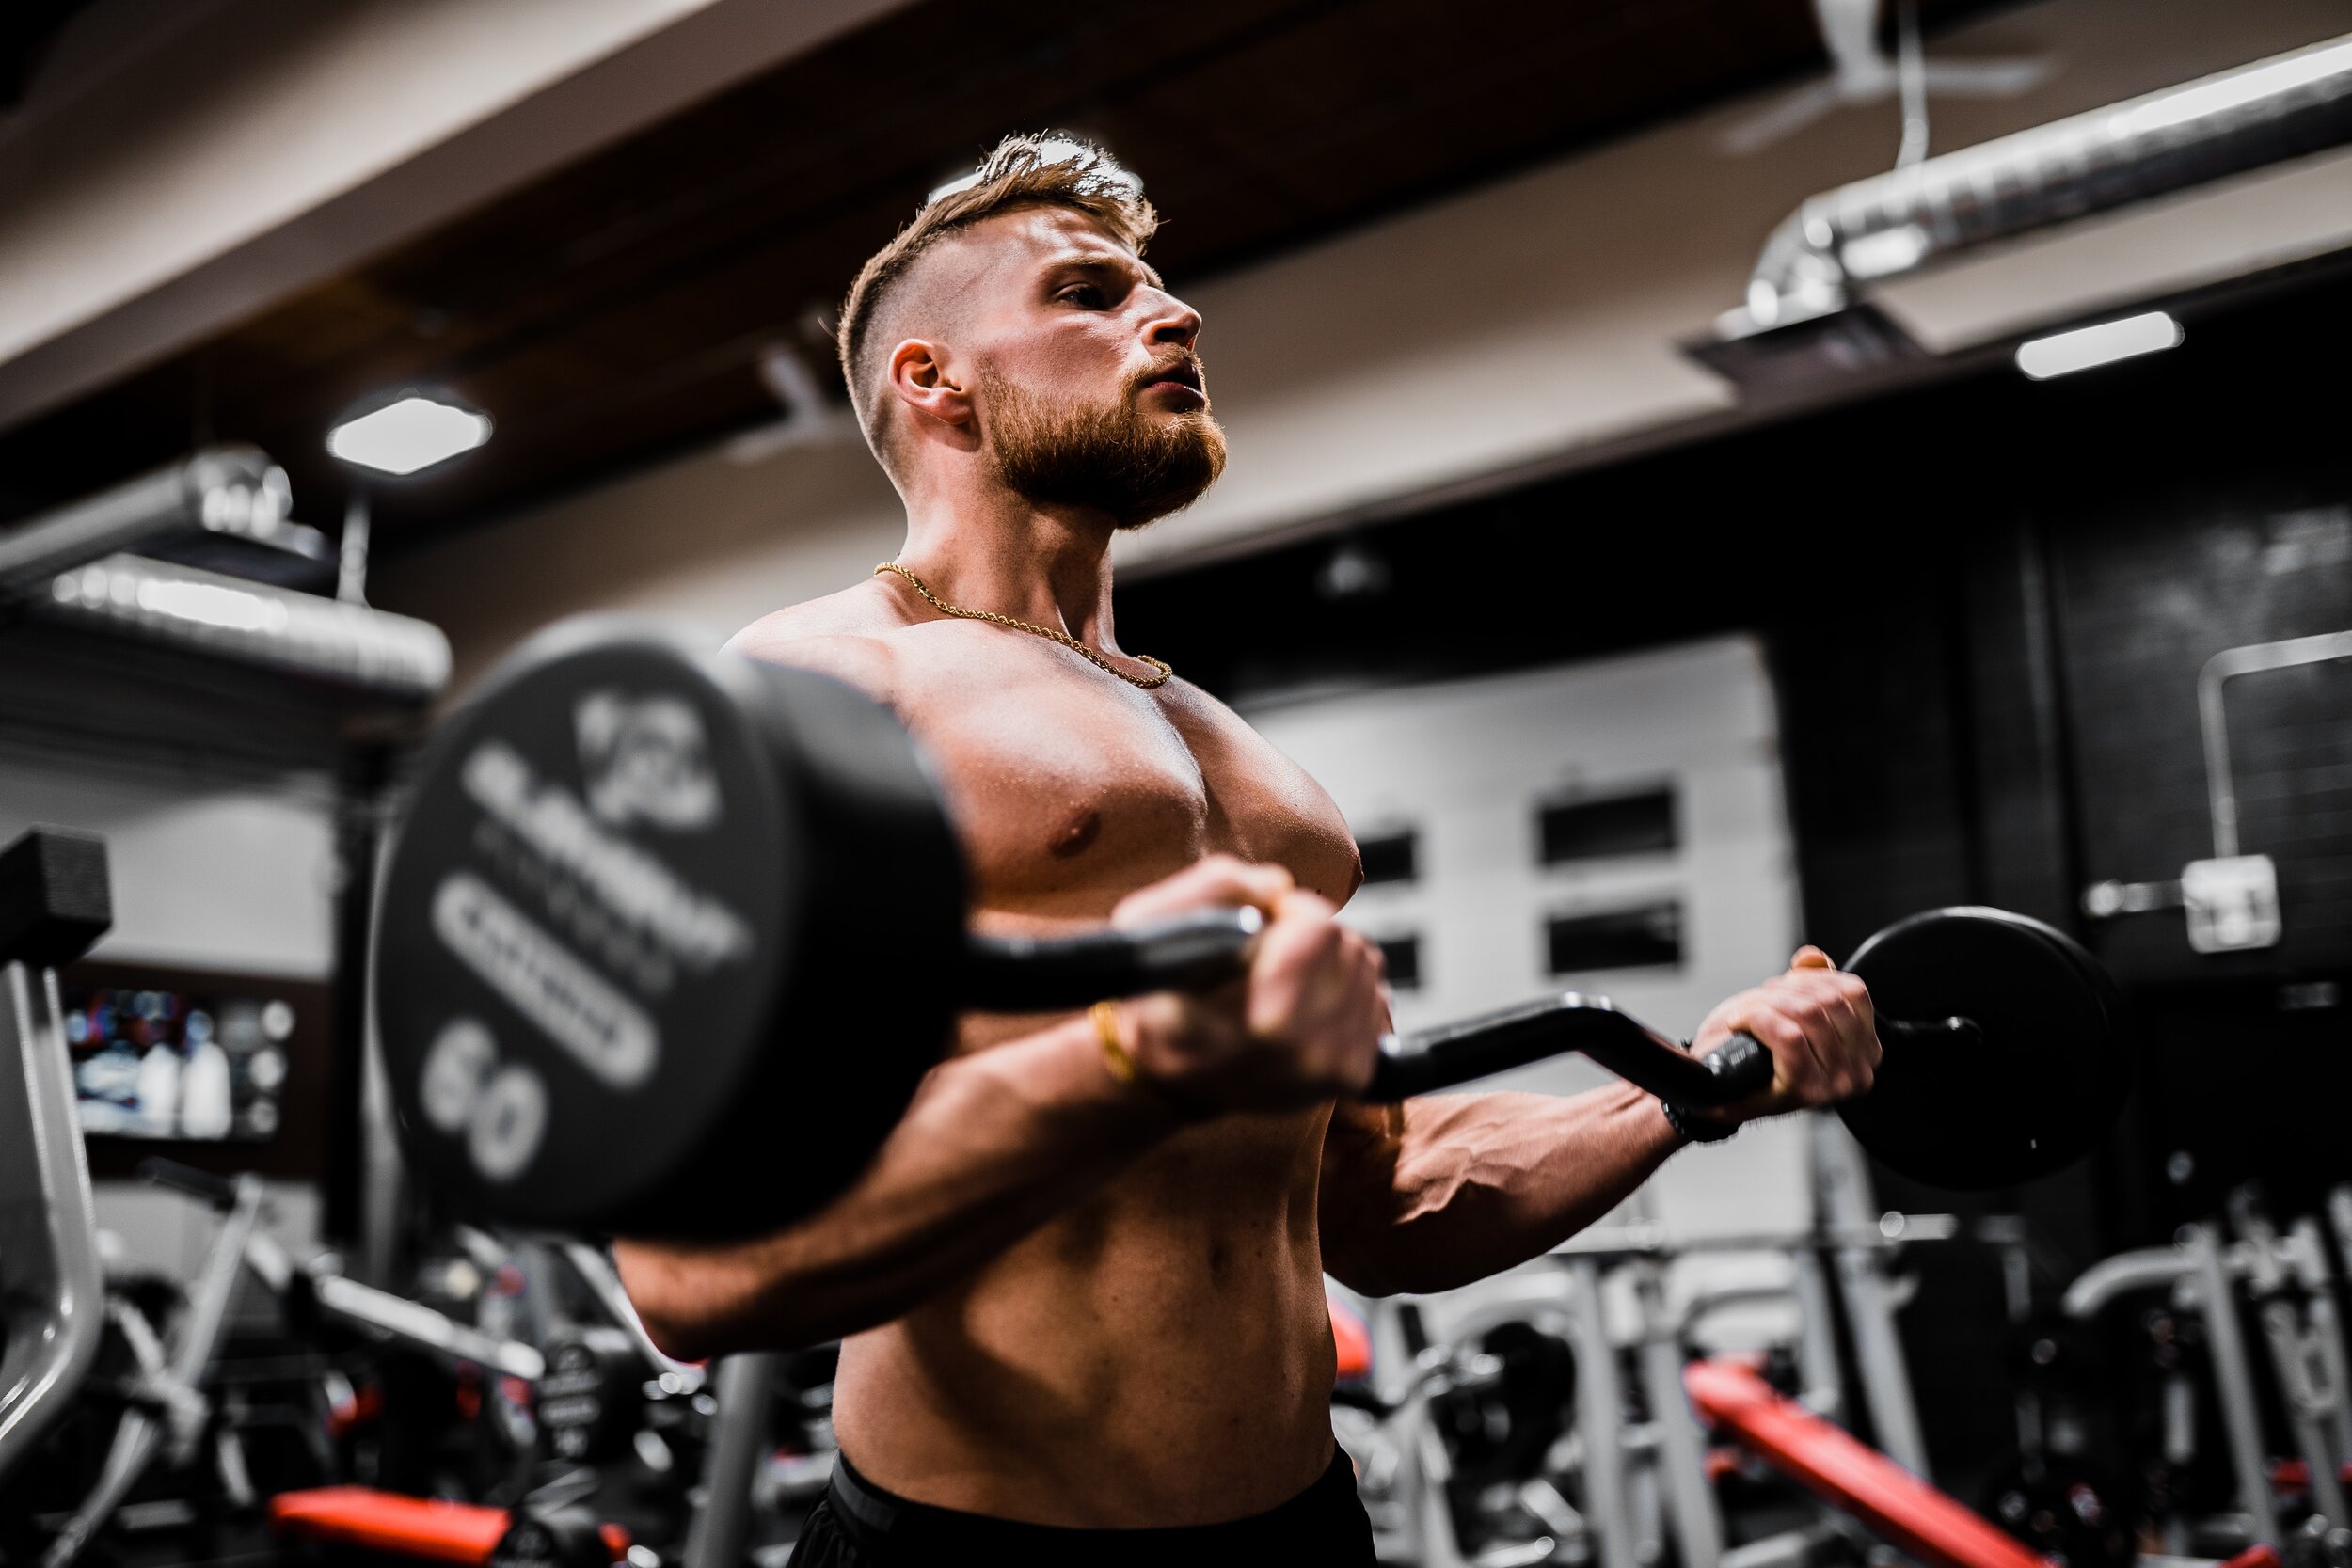 Bulking vs. Cutting: Which Is Right For You?